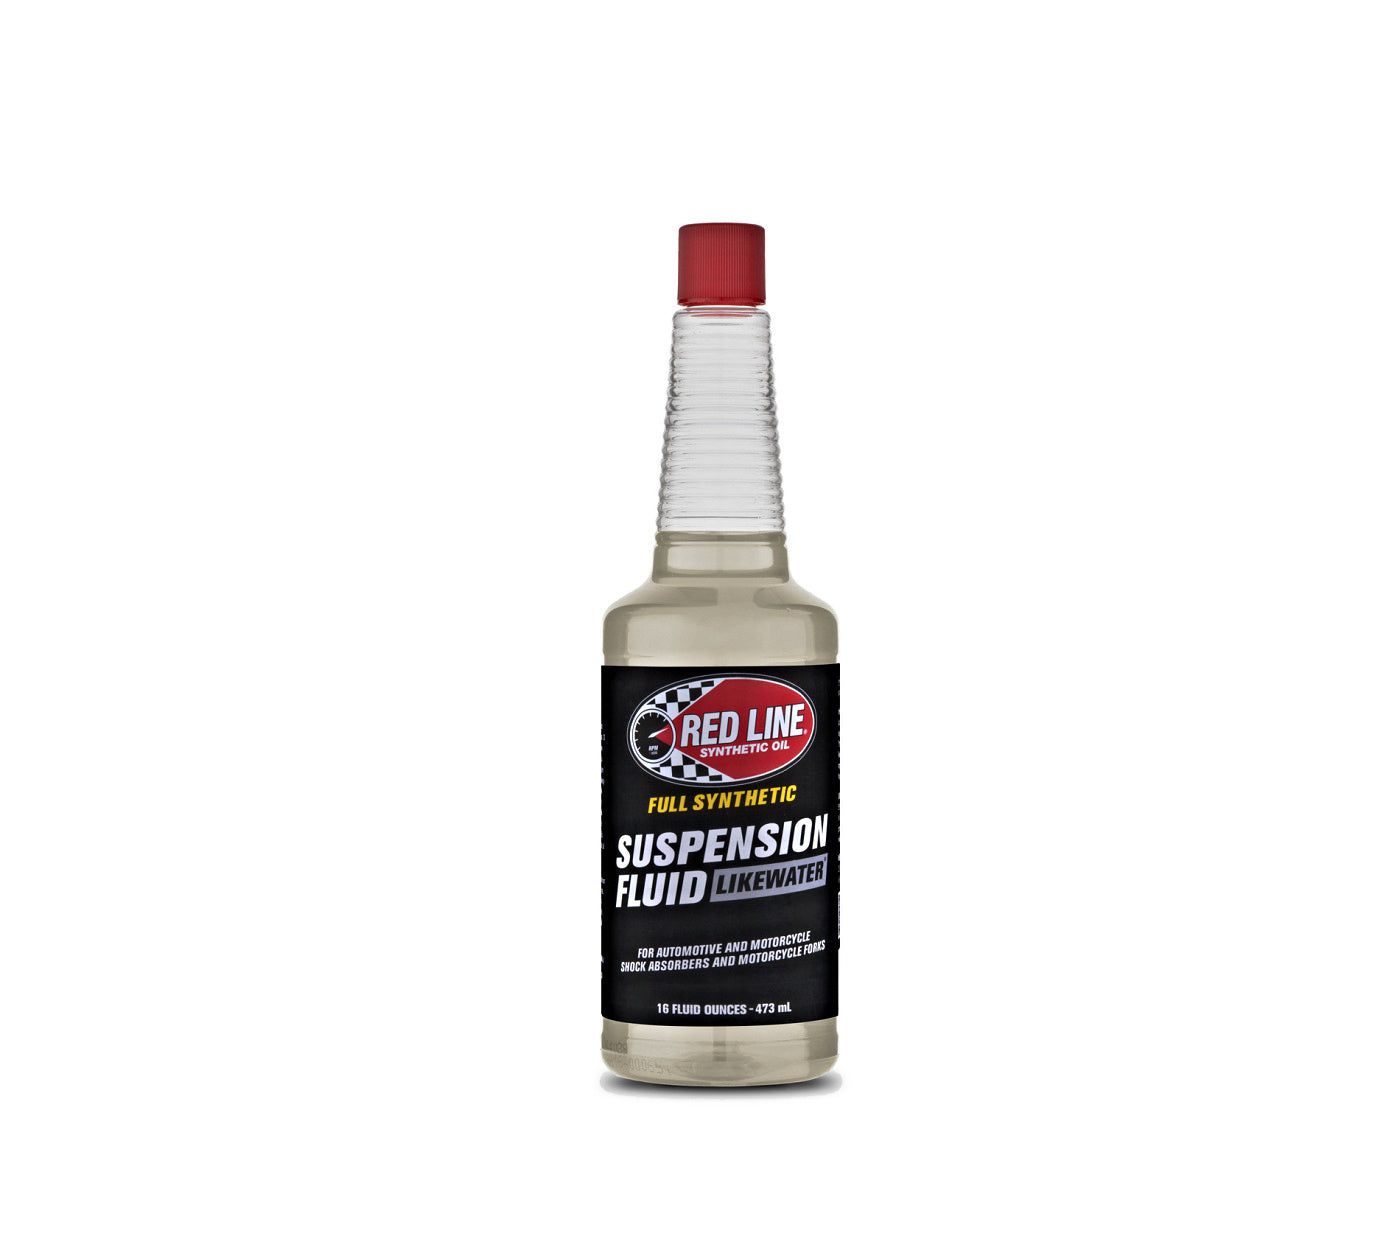 RED LINE OIL 91102 Suspension Fluid LikeWater 0.47 L (16 oz) Photo-0 